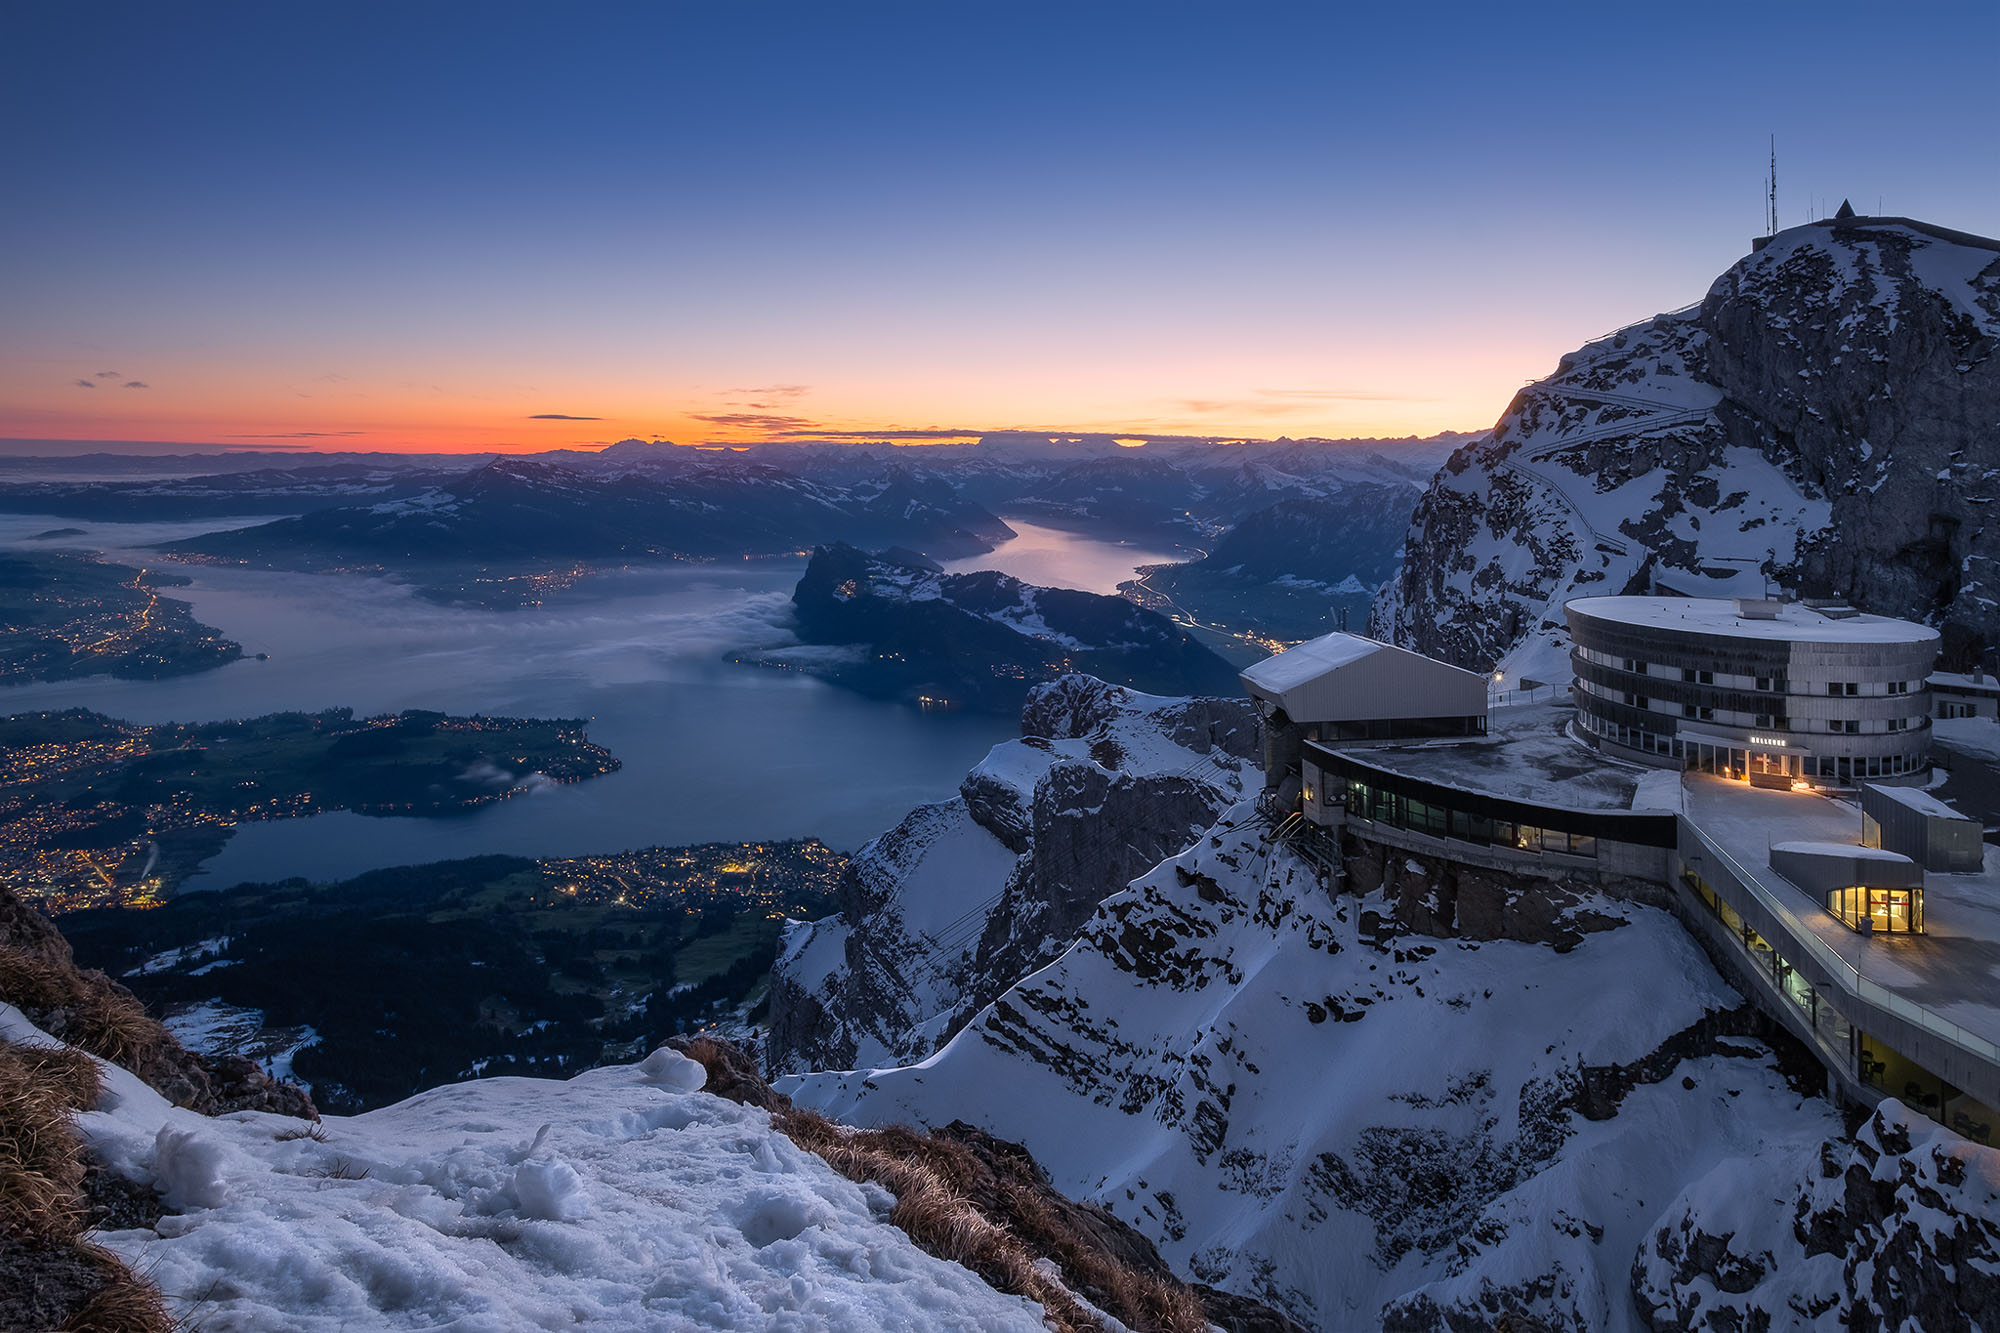 Dawn view of Lucerne from the top of Pilatus, Switzerland